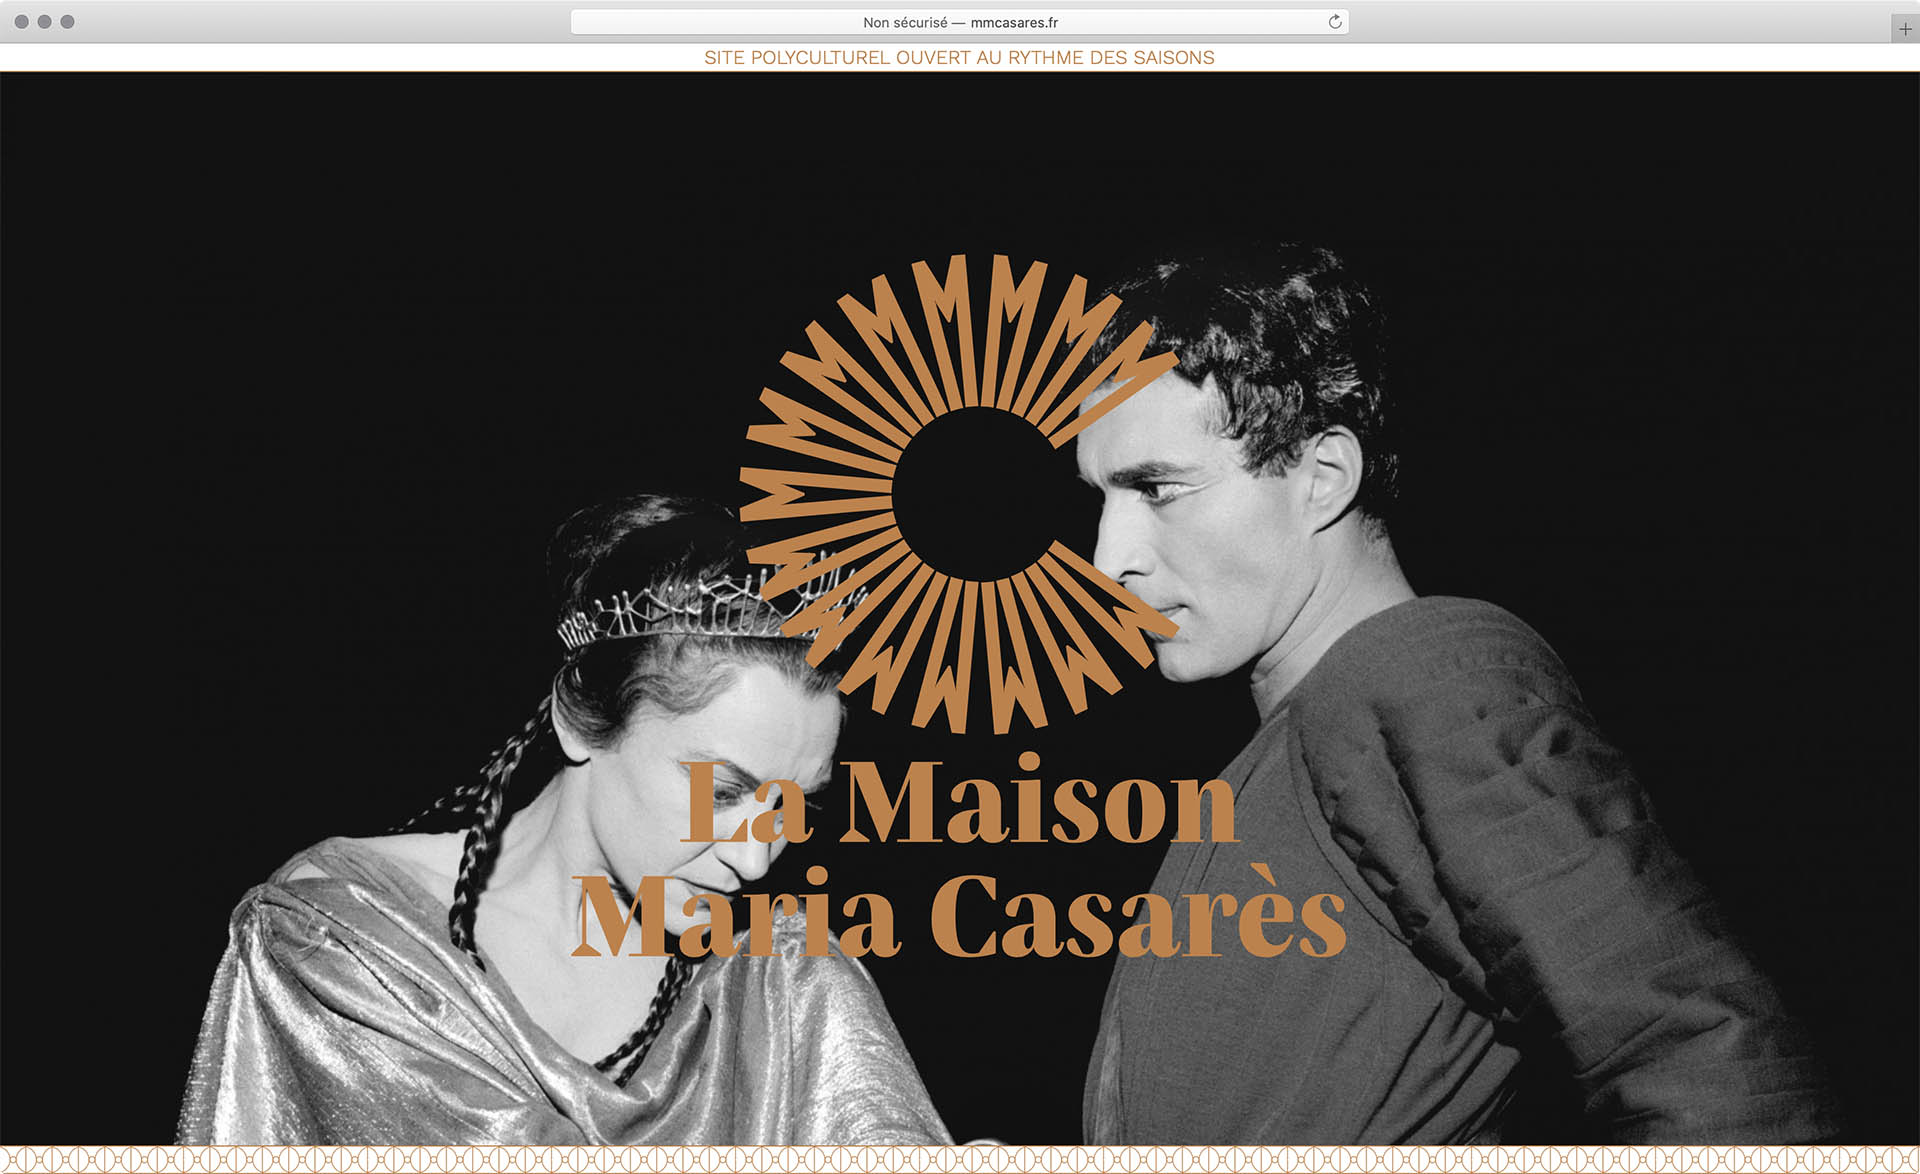 Cyril Makhoul - (link: http://mmcasares.fr/ text: Maison Maria Casarès )— Visual Identity and webdesign. (With (link: http://www.salutpublic.be/ text: Salut Public))